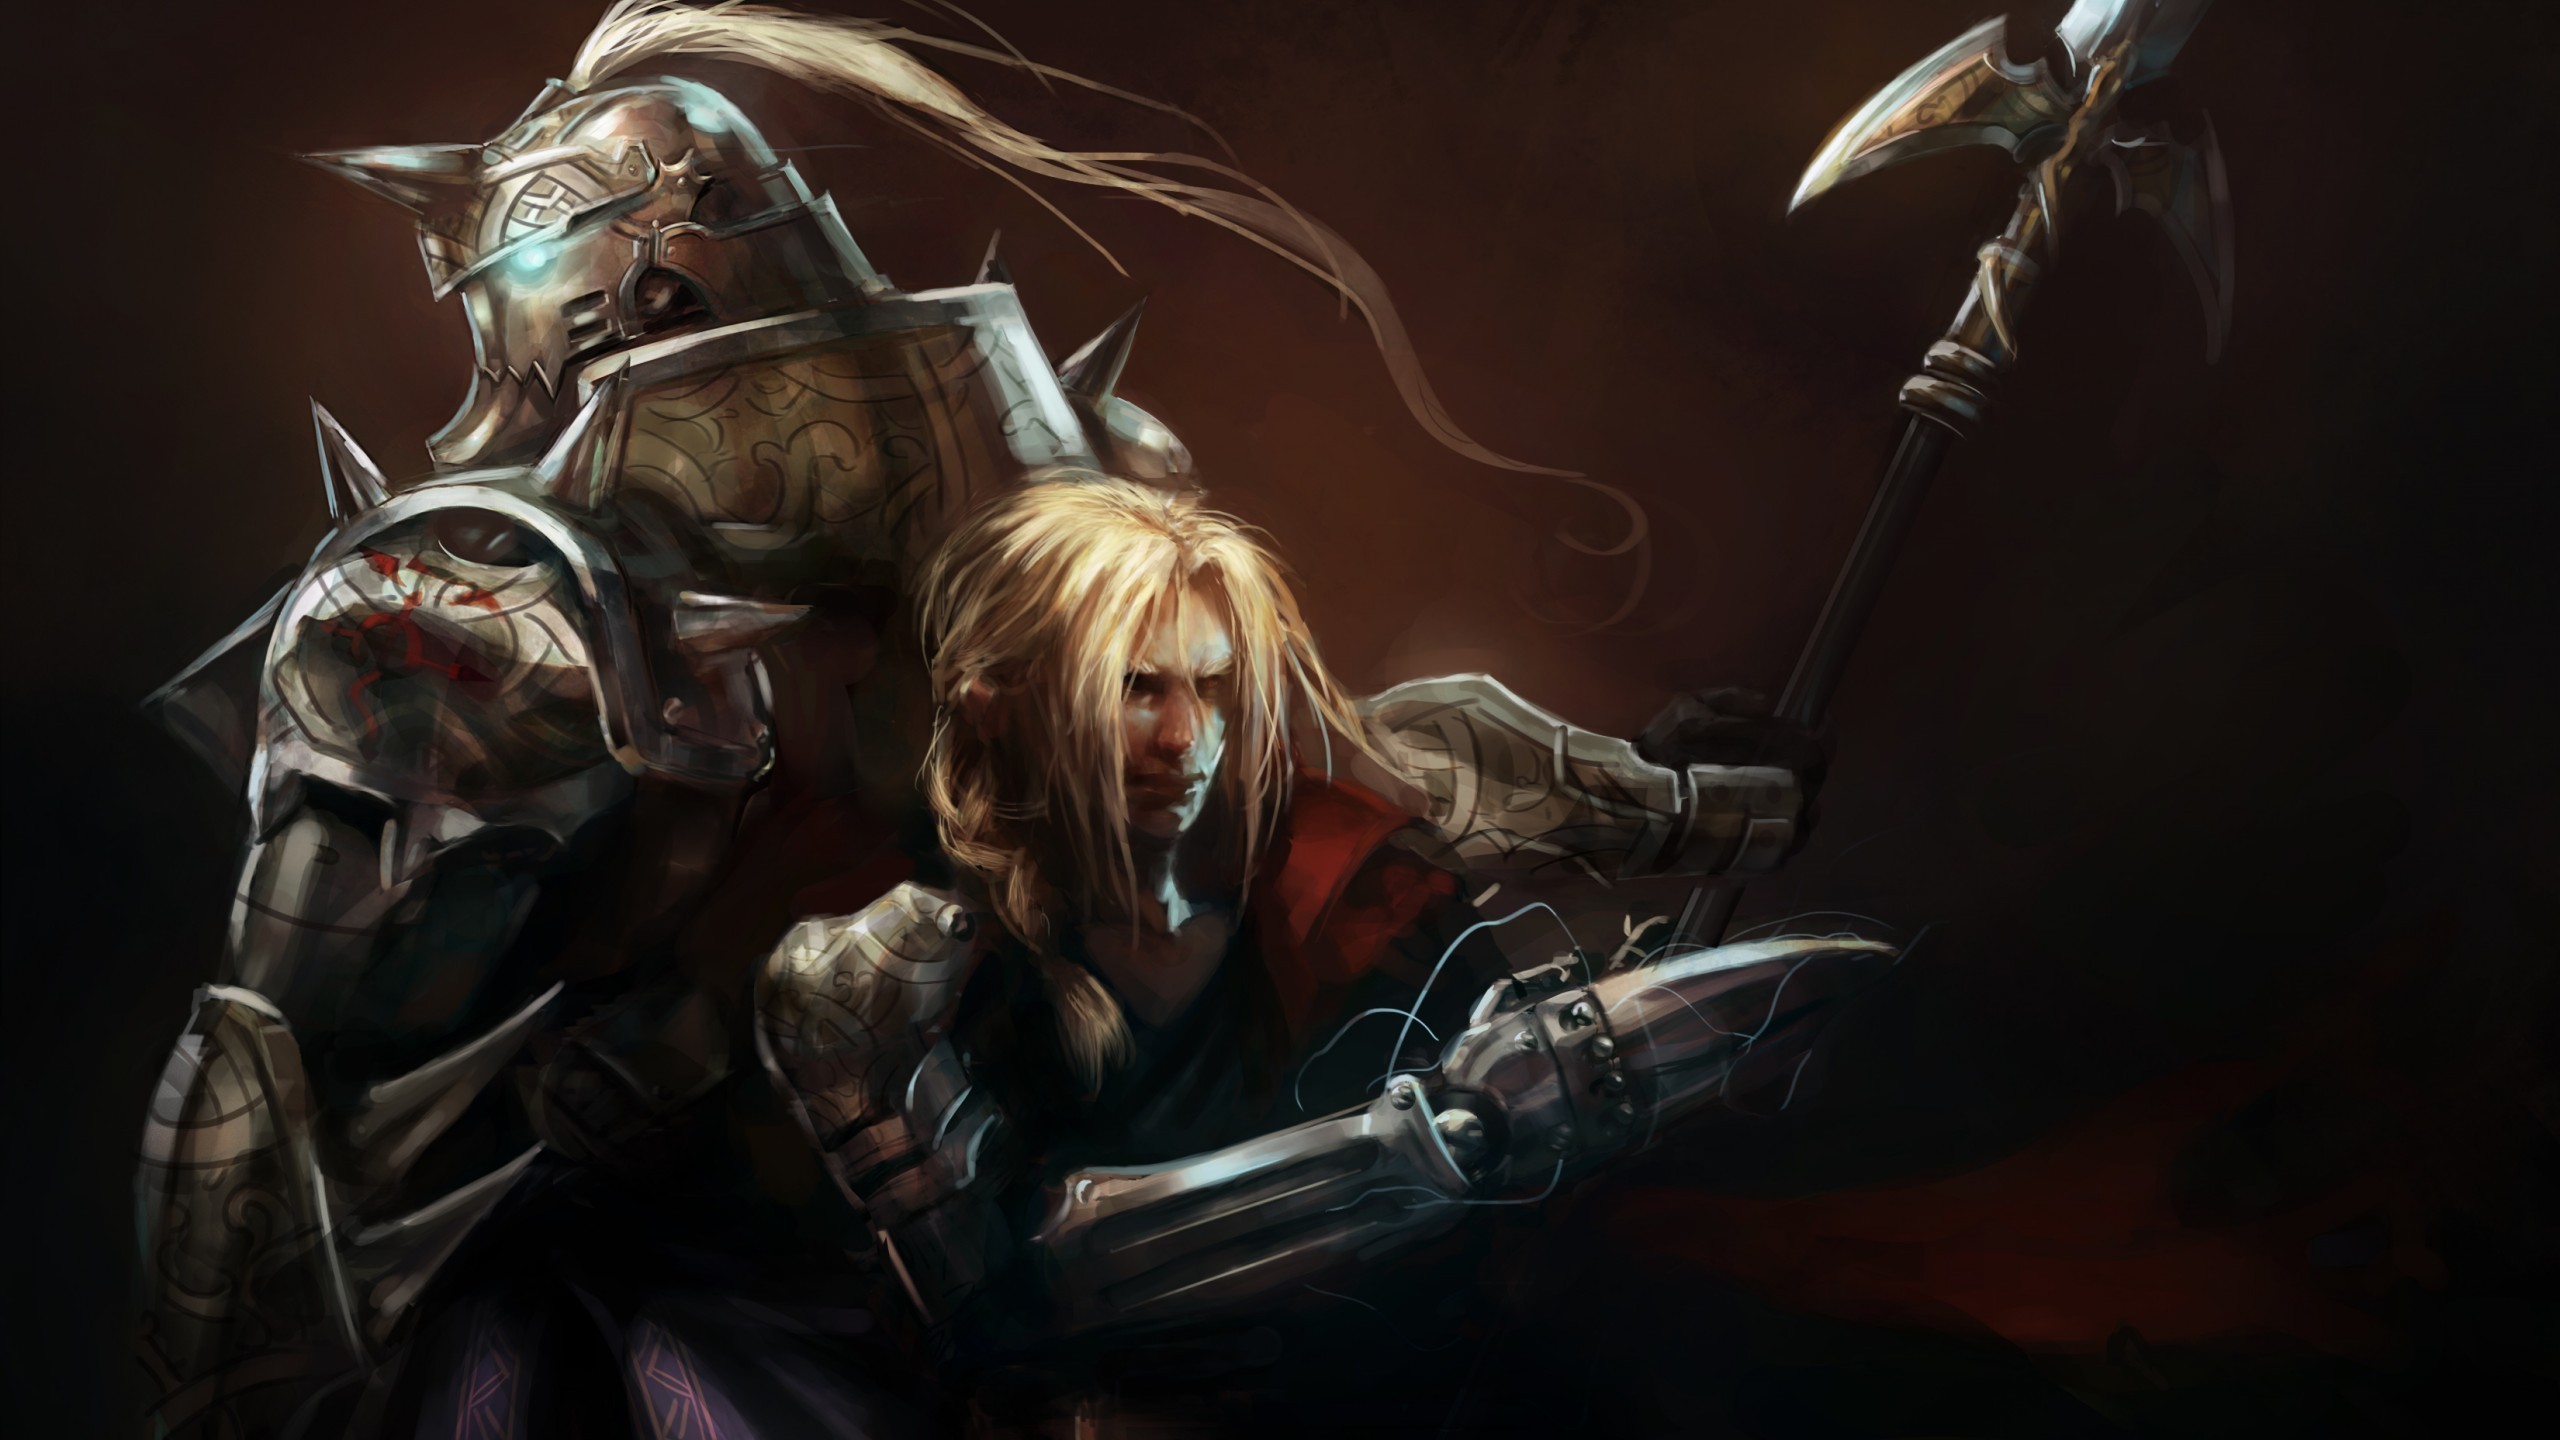 2560x1440 wallpaper.wiki-Pictures-HD-Edward-Elric-PIC-WPB007088